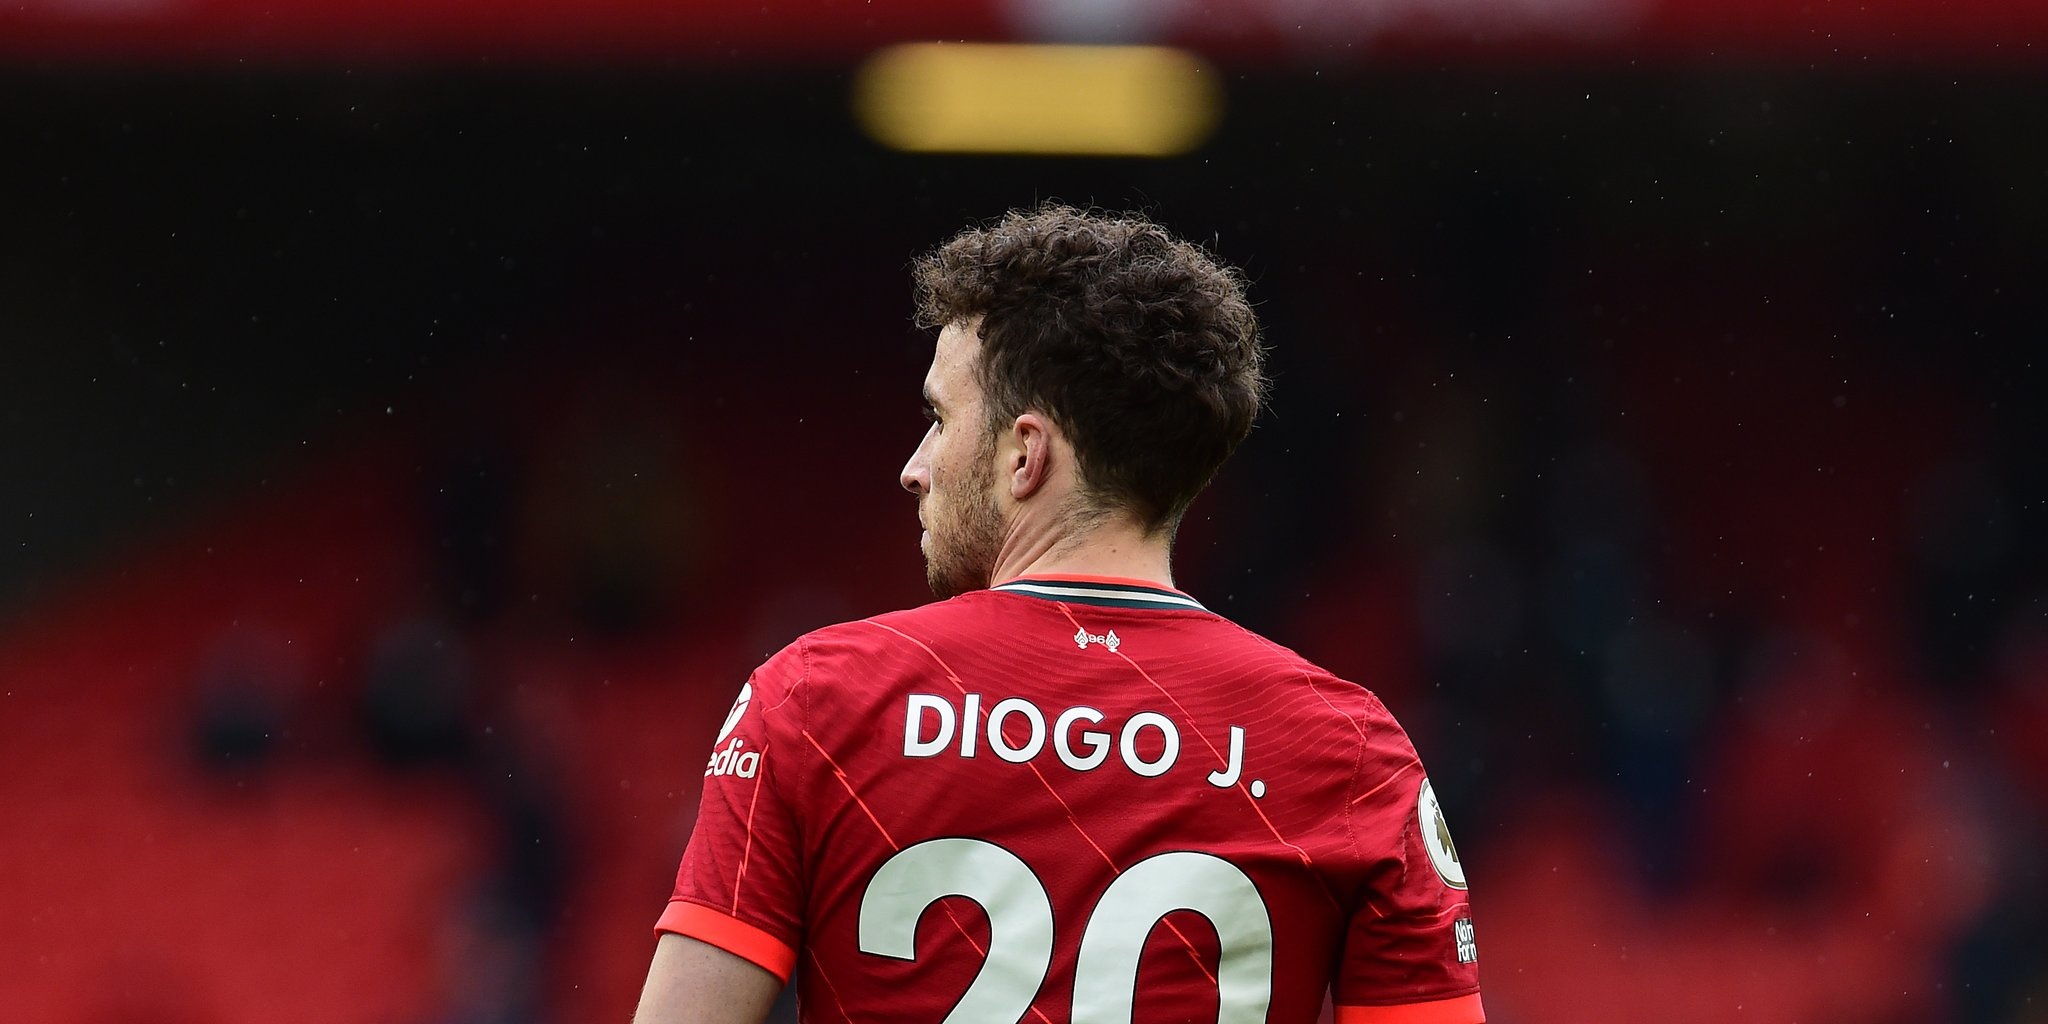 Diogo Jota declared fit to feature against Chelsea in the Carabao Cup final